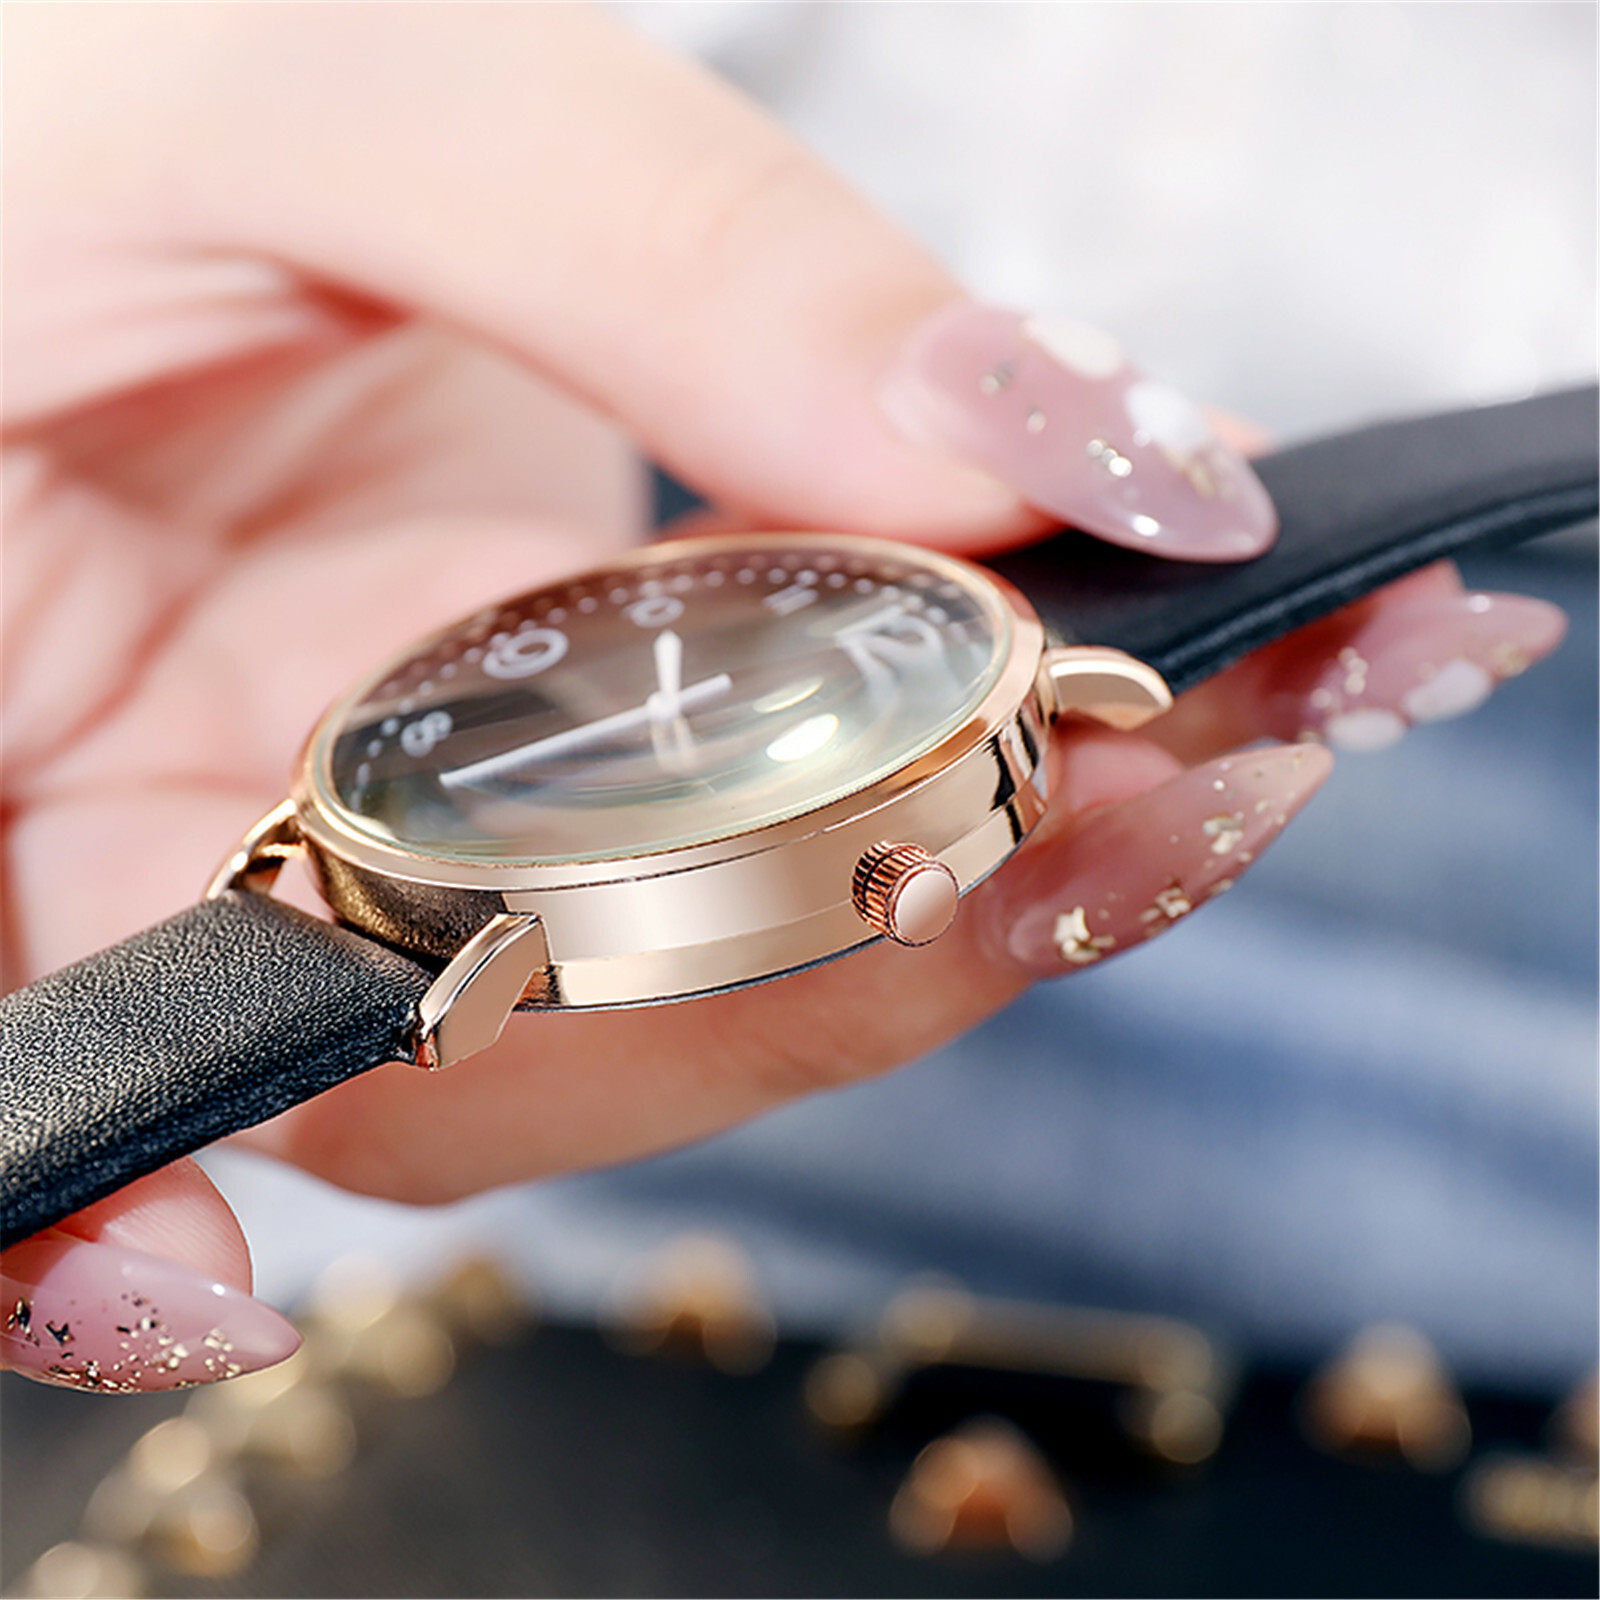 Women's Simple Fashion Leather Watch